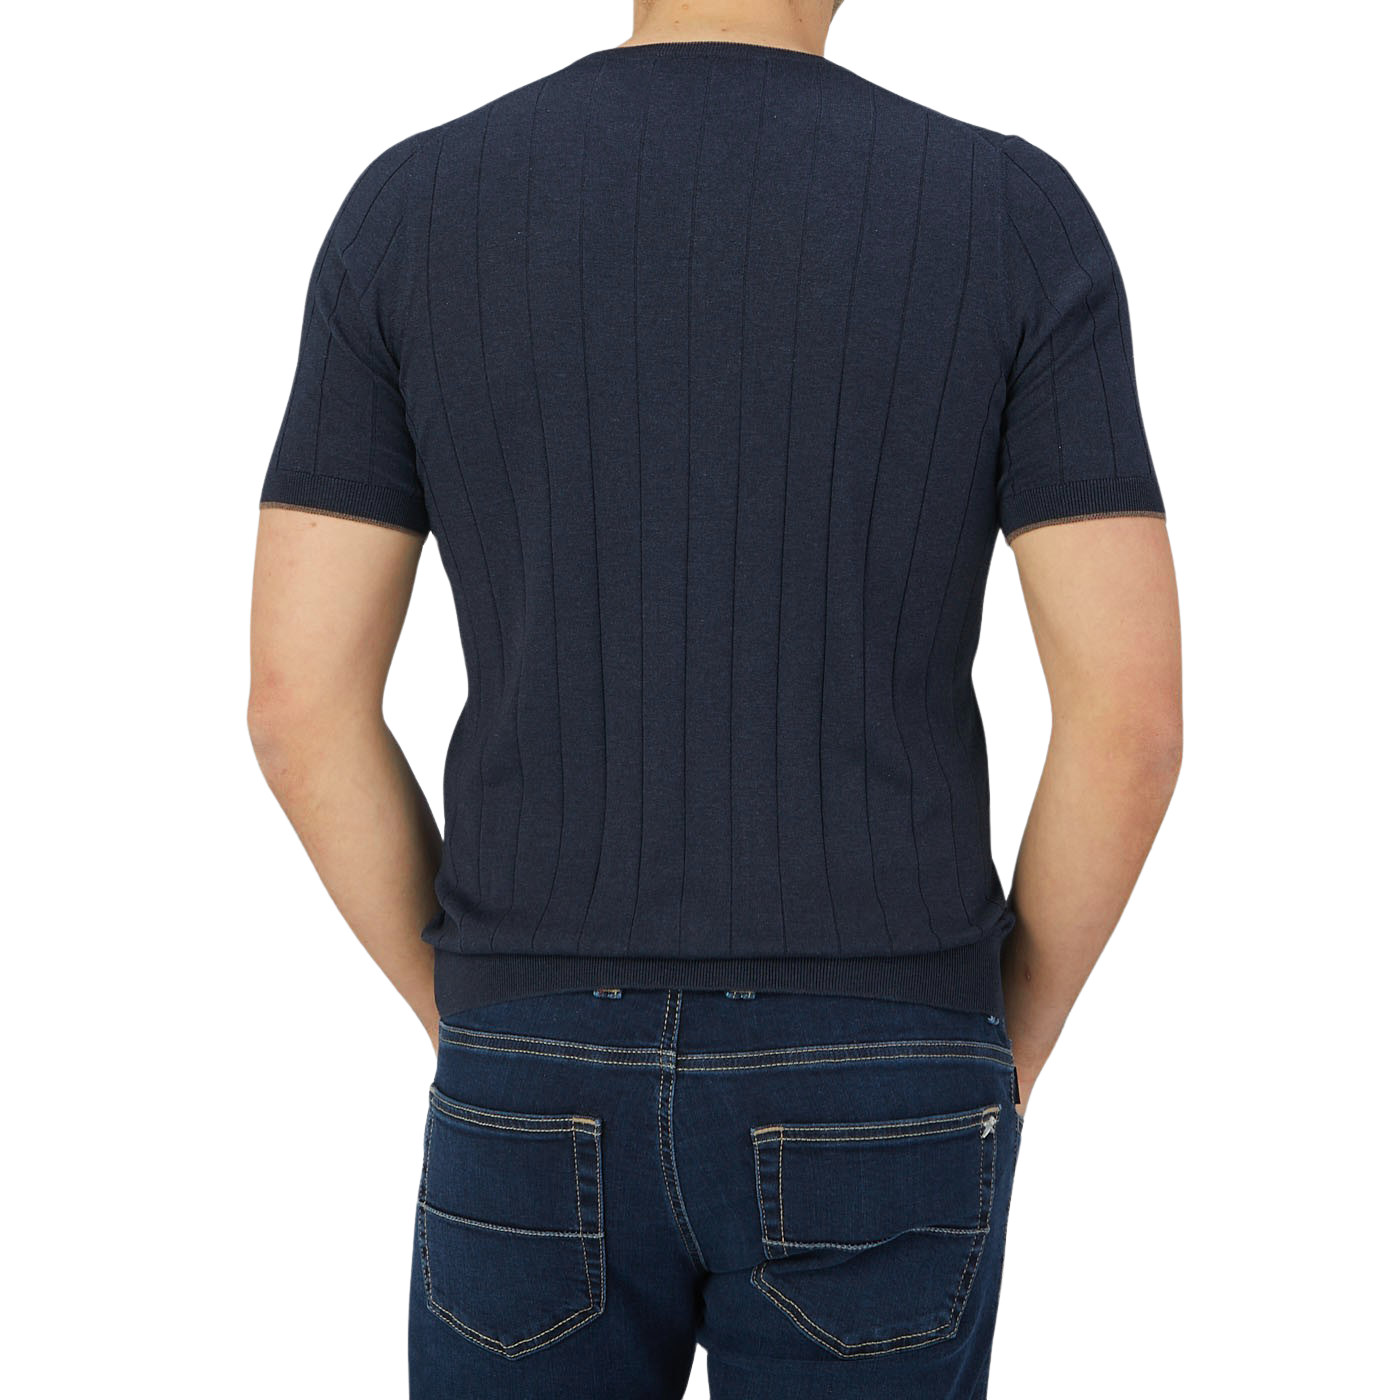 The back view of a man wearing a Gran Sasso Navy Blue Knitted Silk T-Shirt.